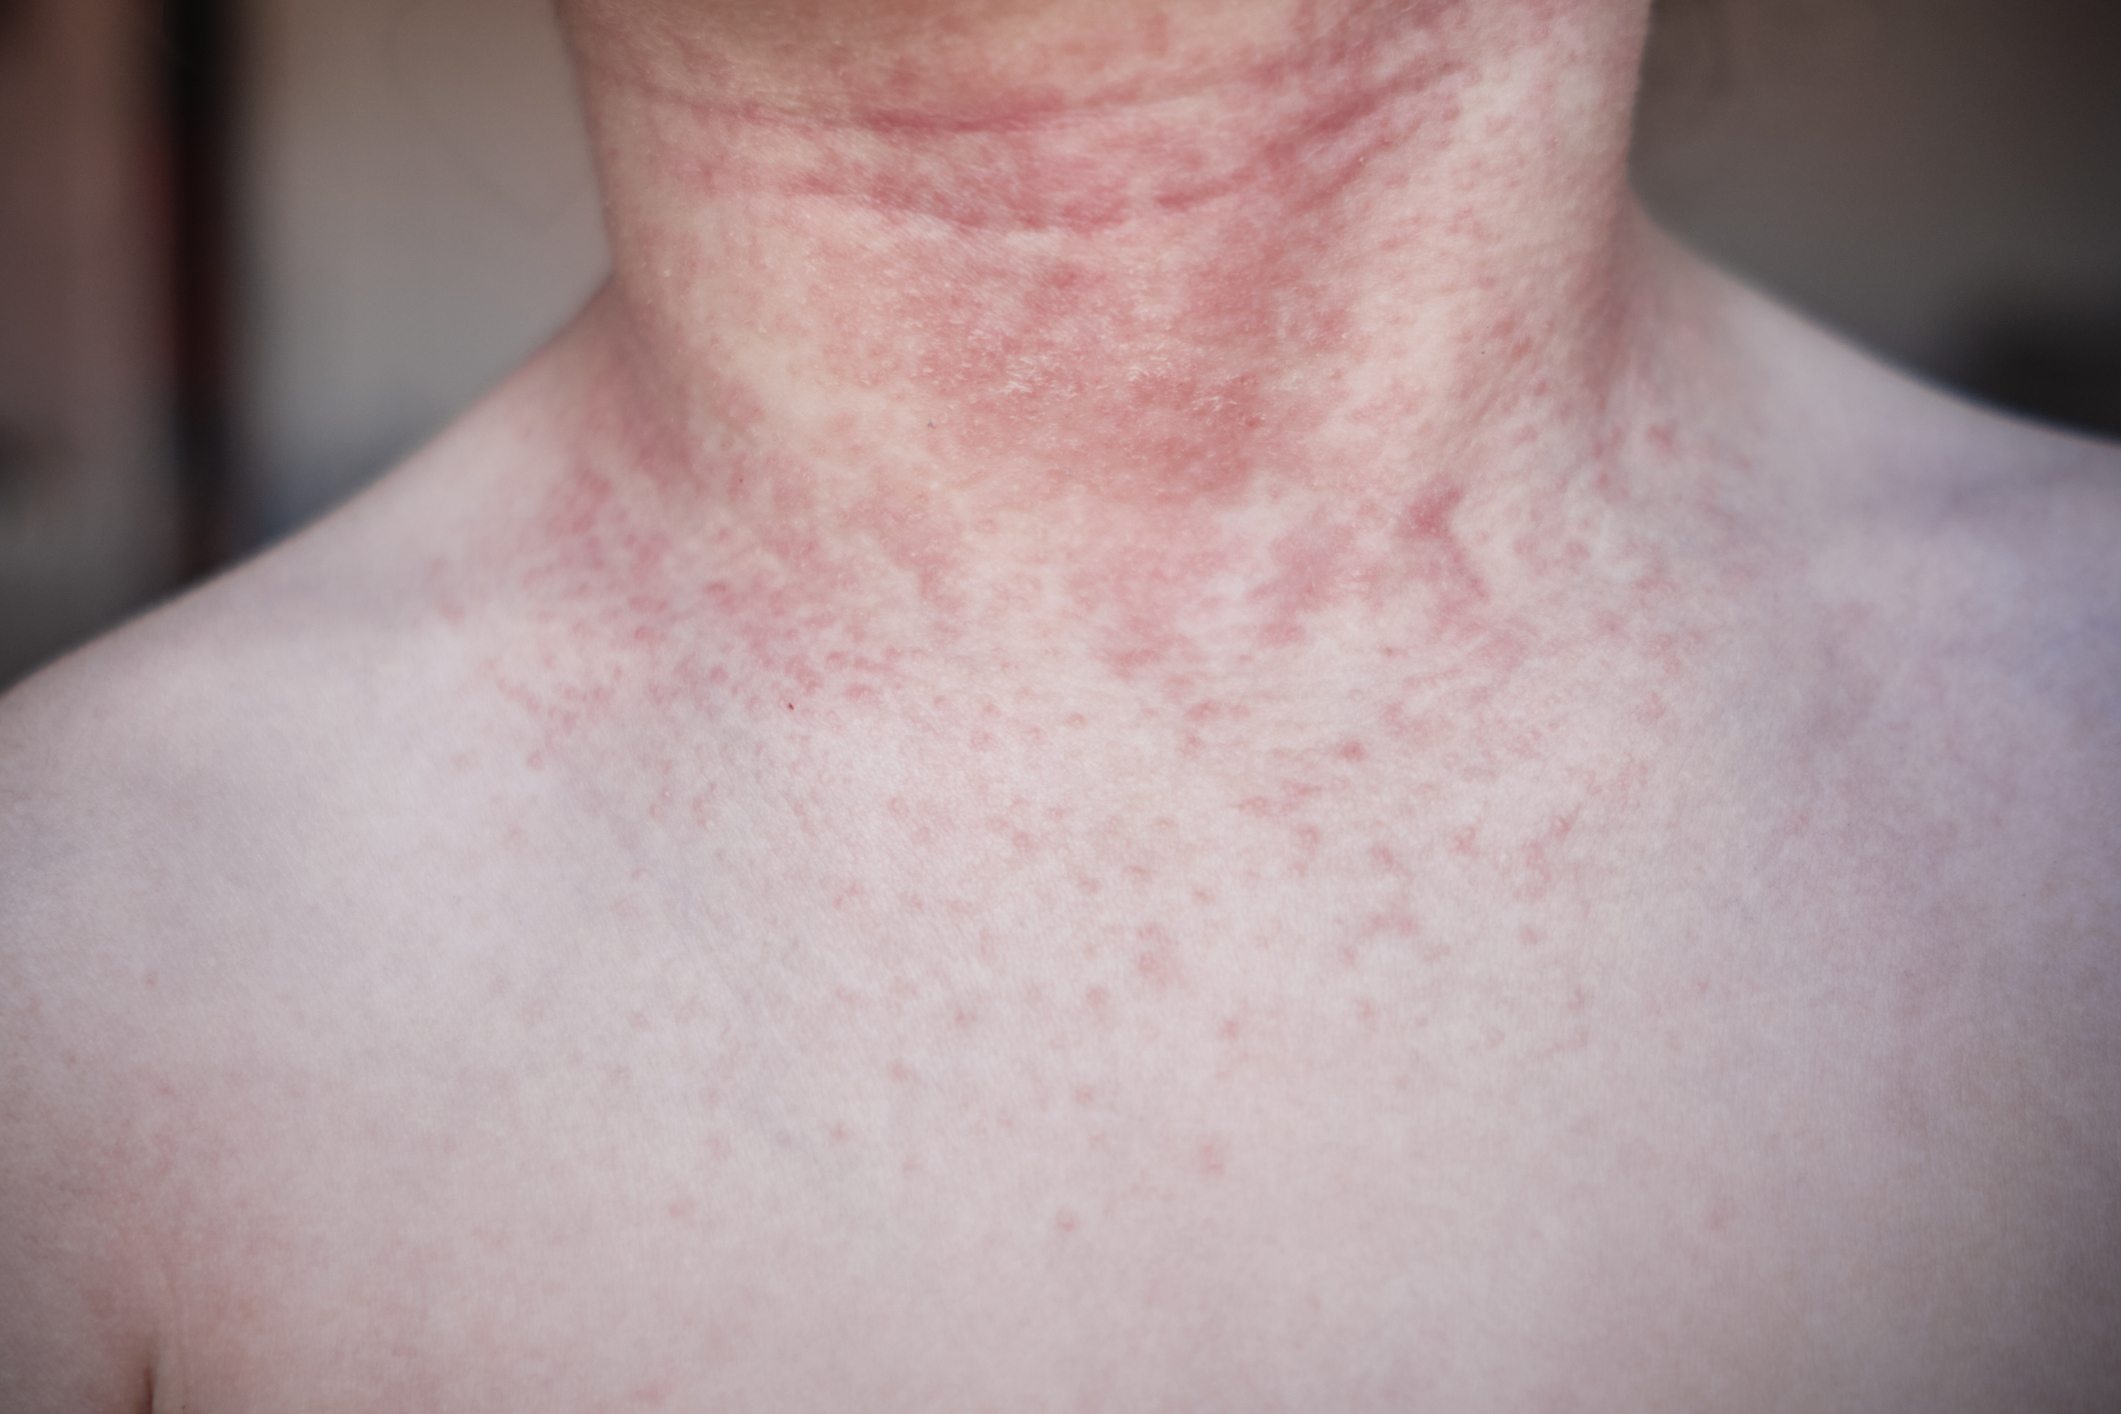 Close-up of a person&#x27;s neck with a visible red rash, potentially an internet-found unusual medical condition